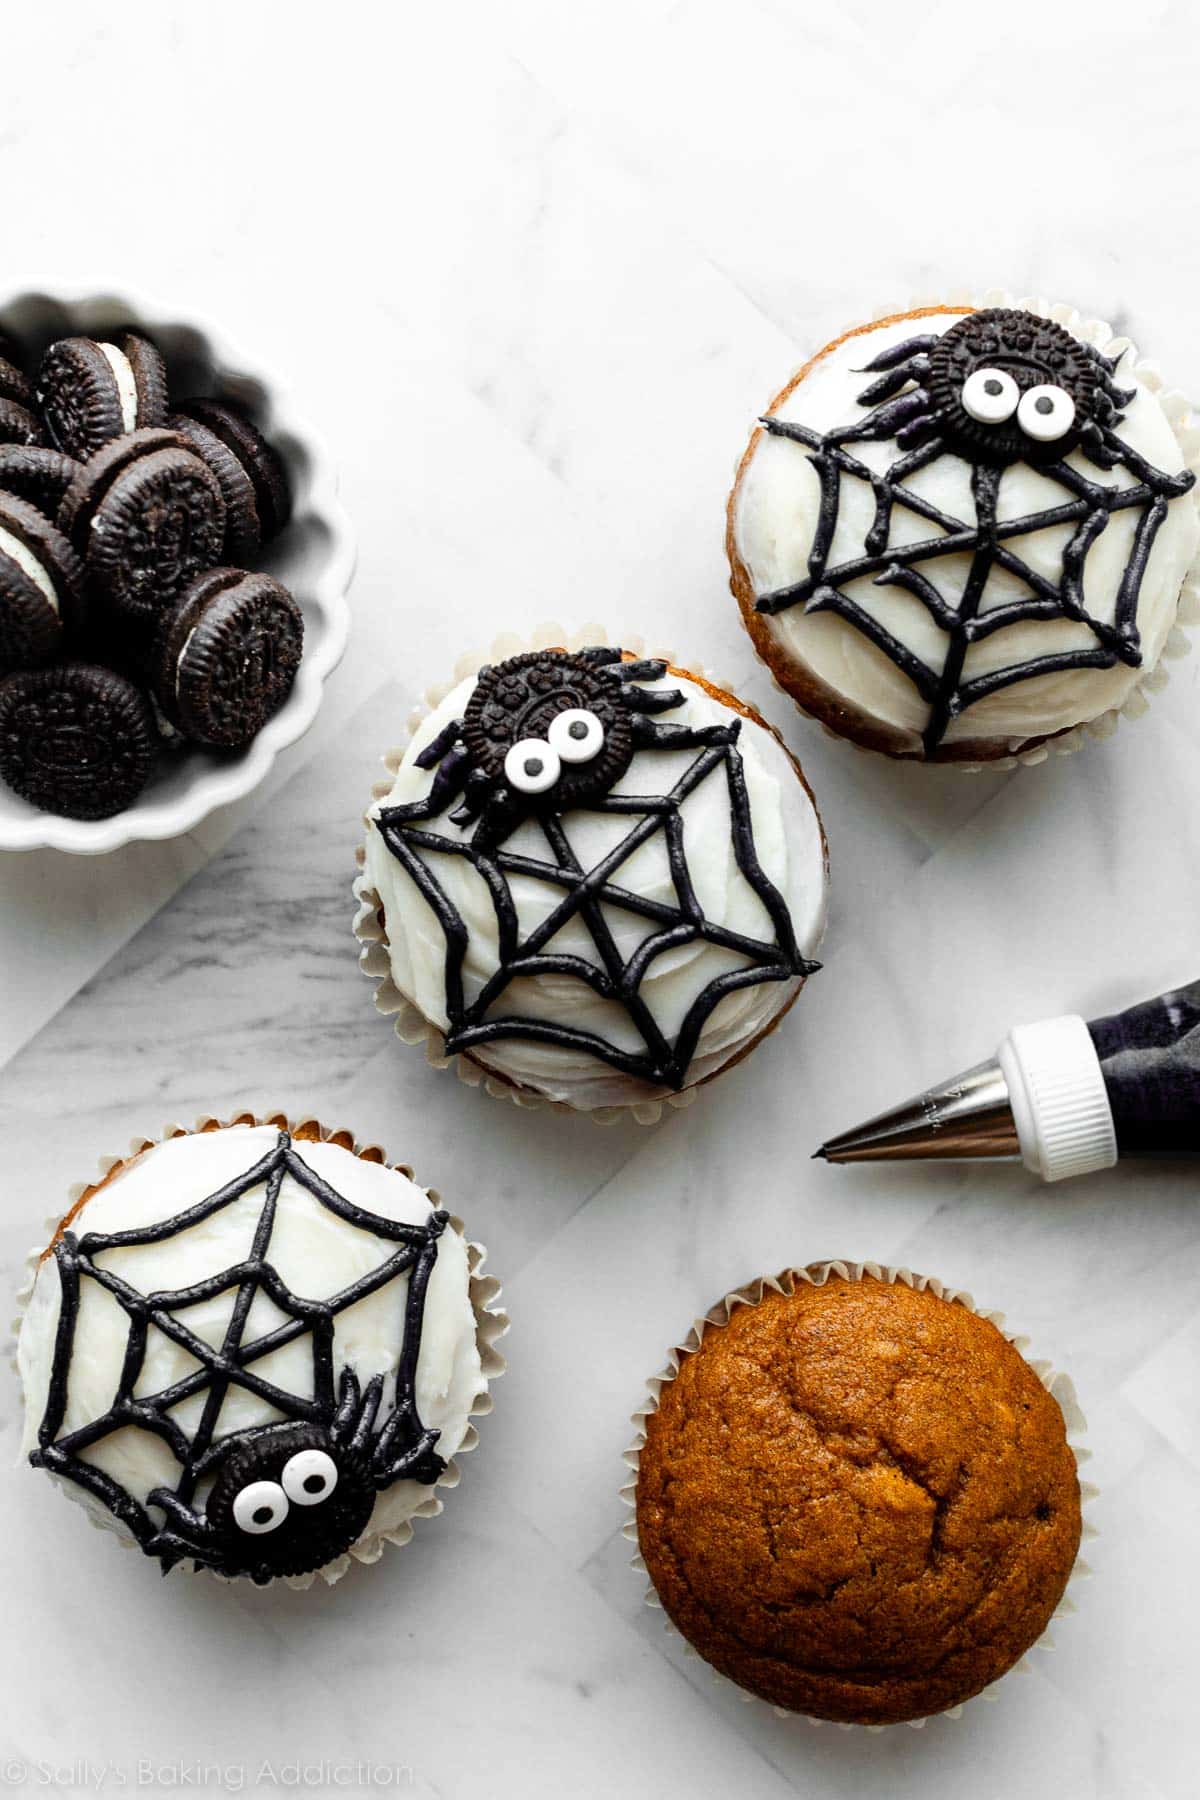 3 spider and spider web decorated cupcakes with white and black frosting.